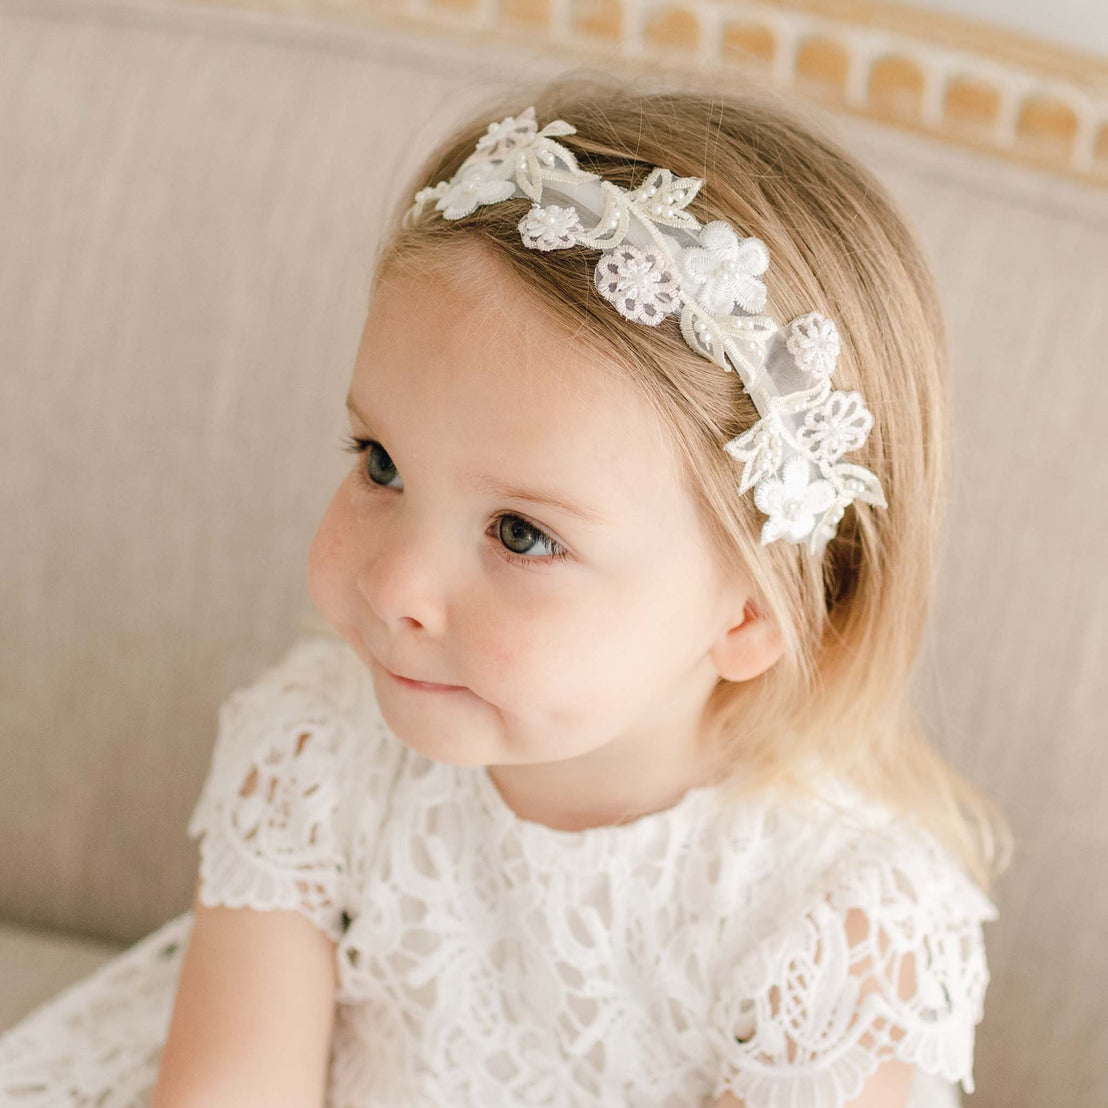 Baby girl wearing a Lola Beaded Flower Headband. Accented with beautiful Lola floral appliqué.